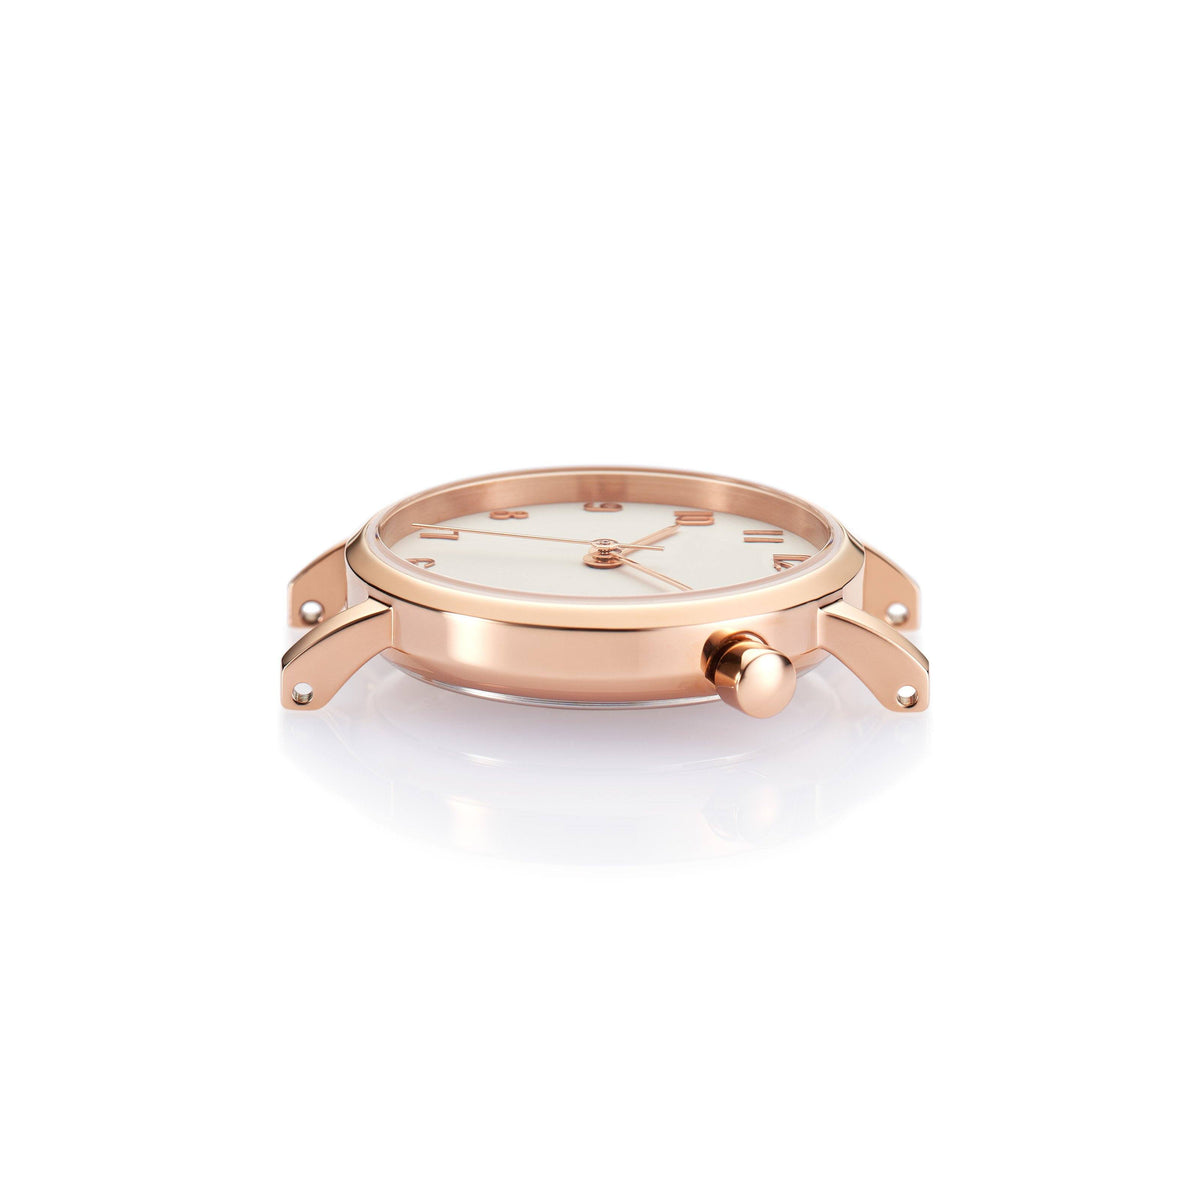 The White and Rose Gold Watch - Tropical (Kids)